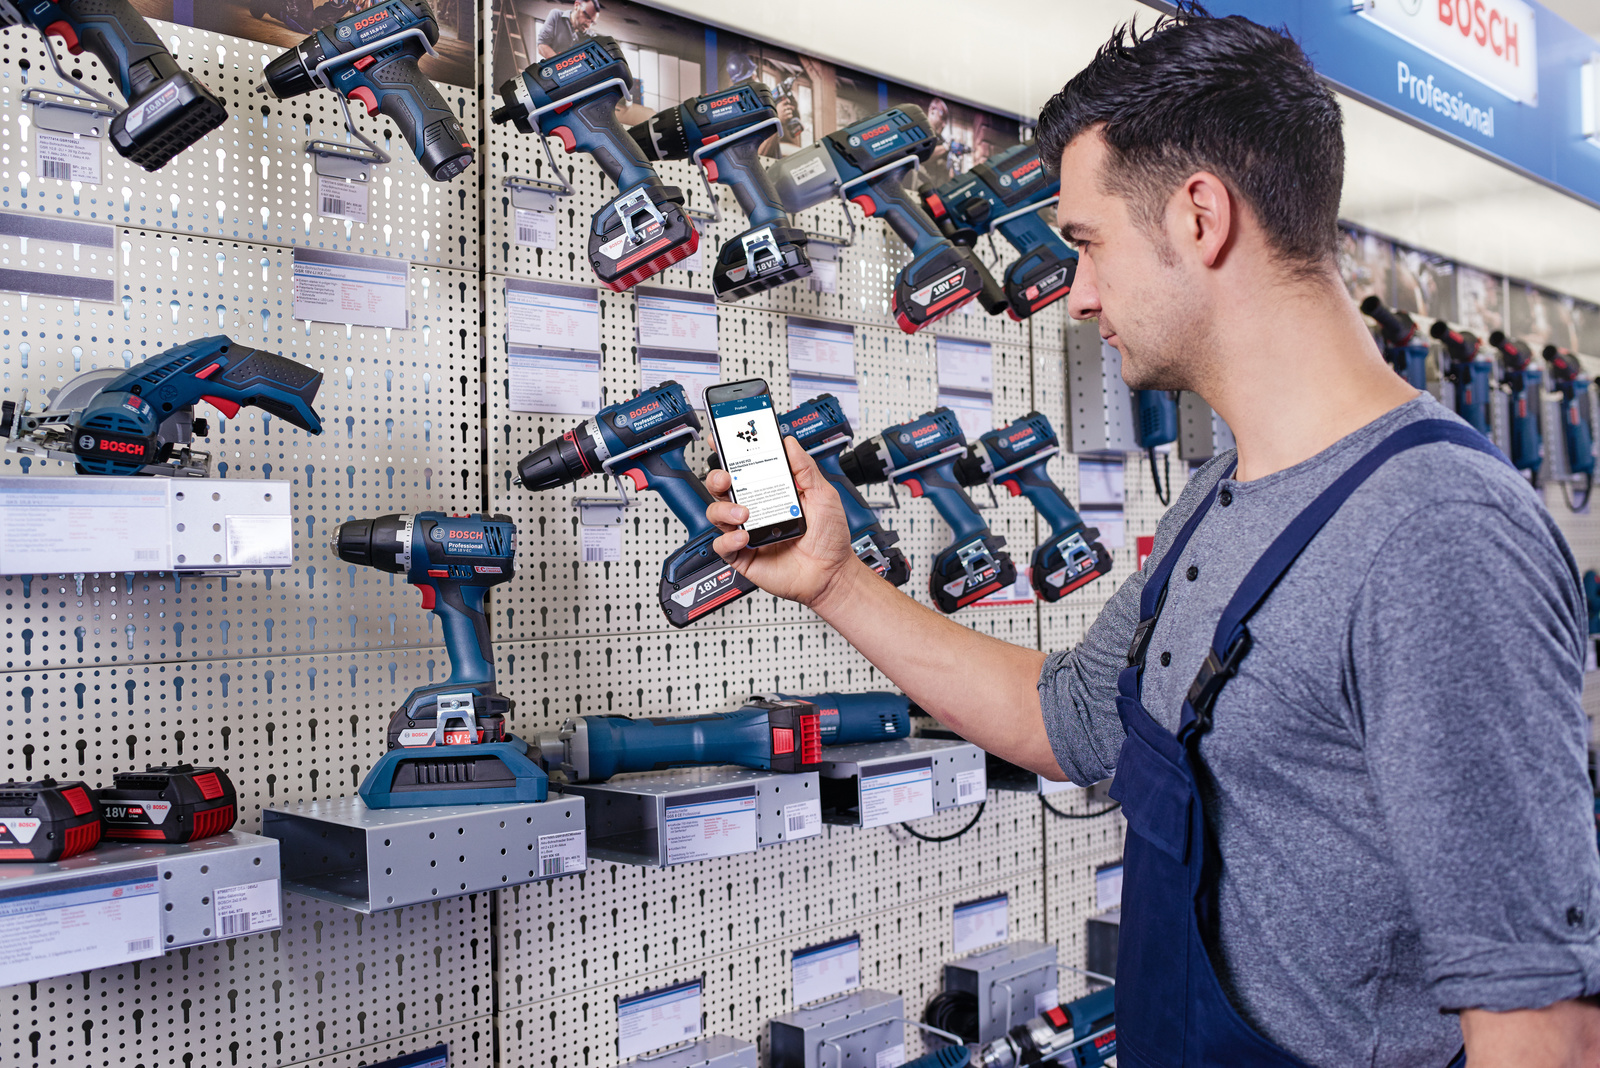 Connected Power Tools Bosch Media Service